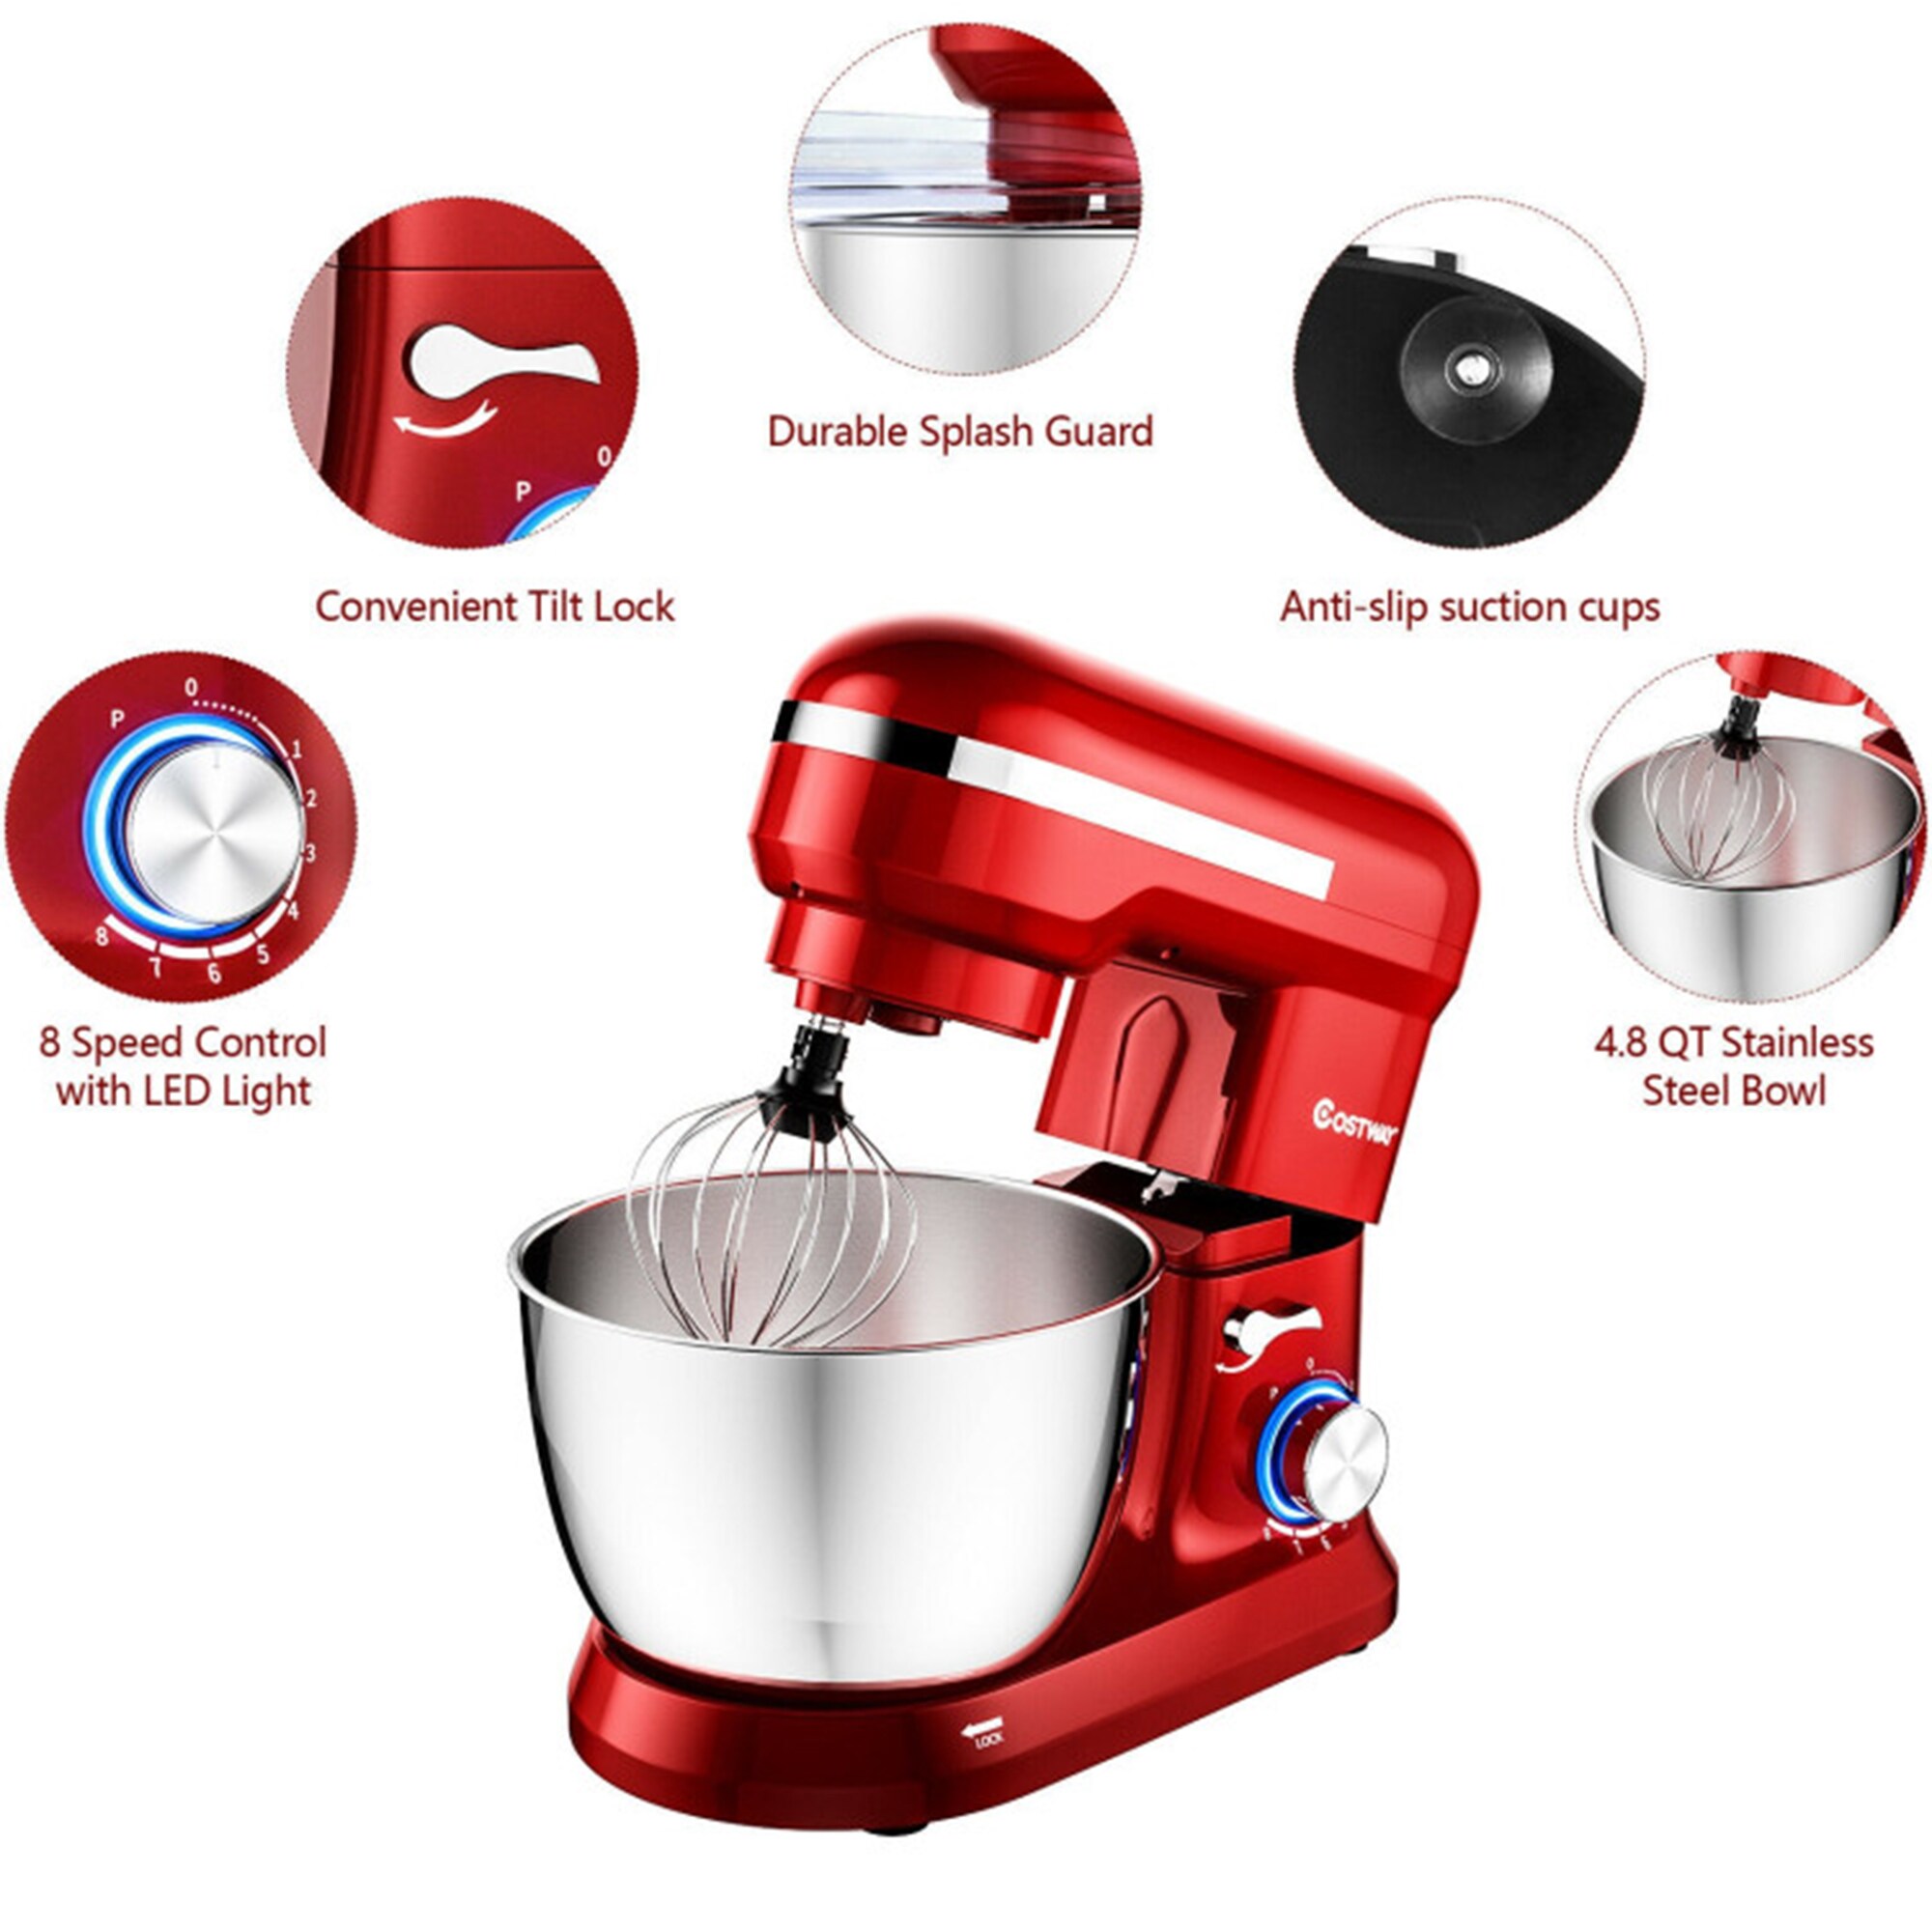 Mondawe 4.8-Quart 8-Speed Red Residential Stand Mixer at